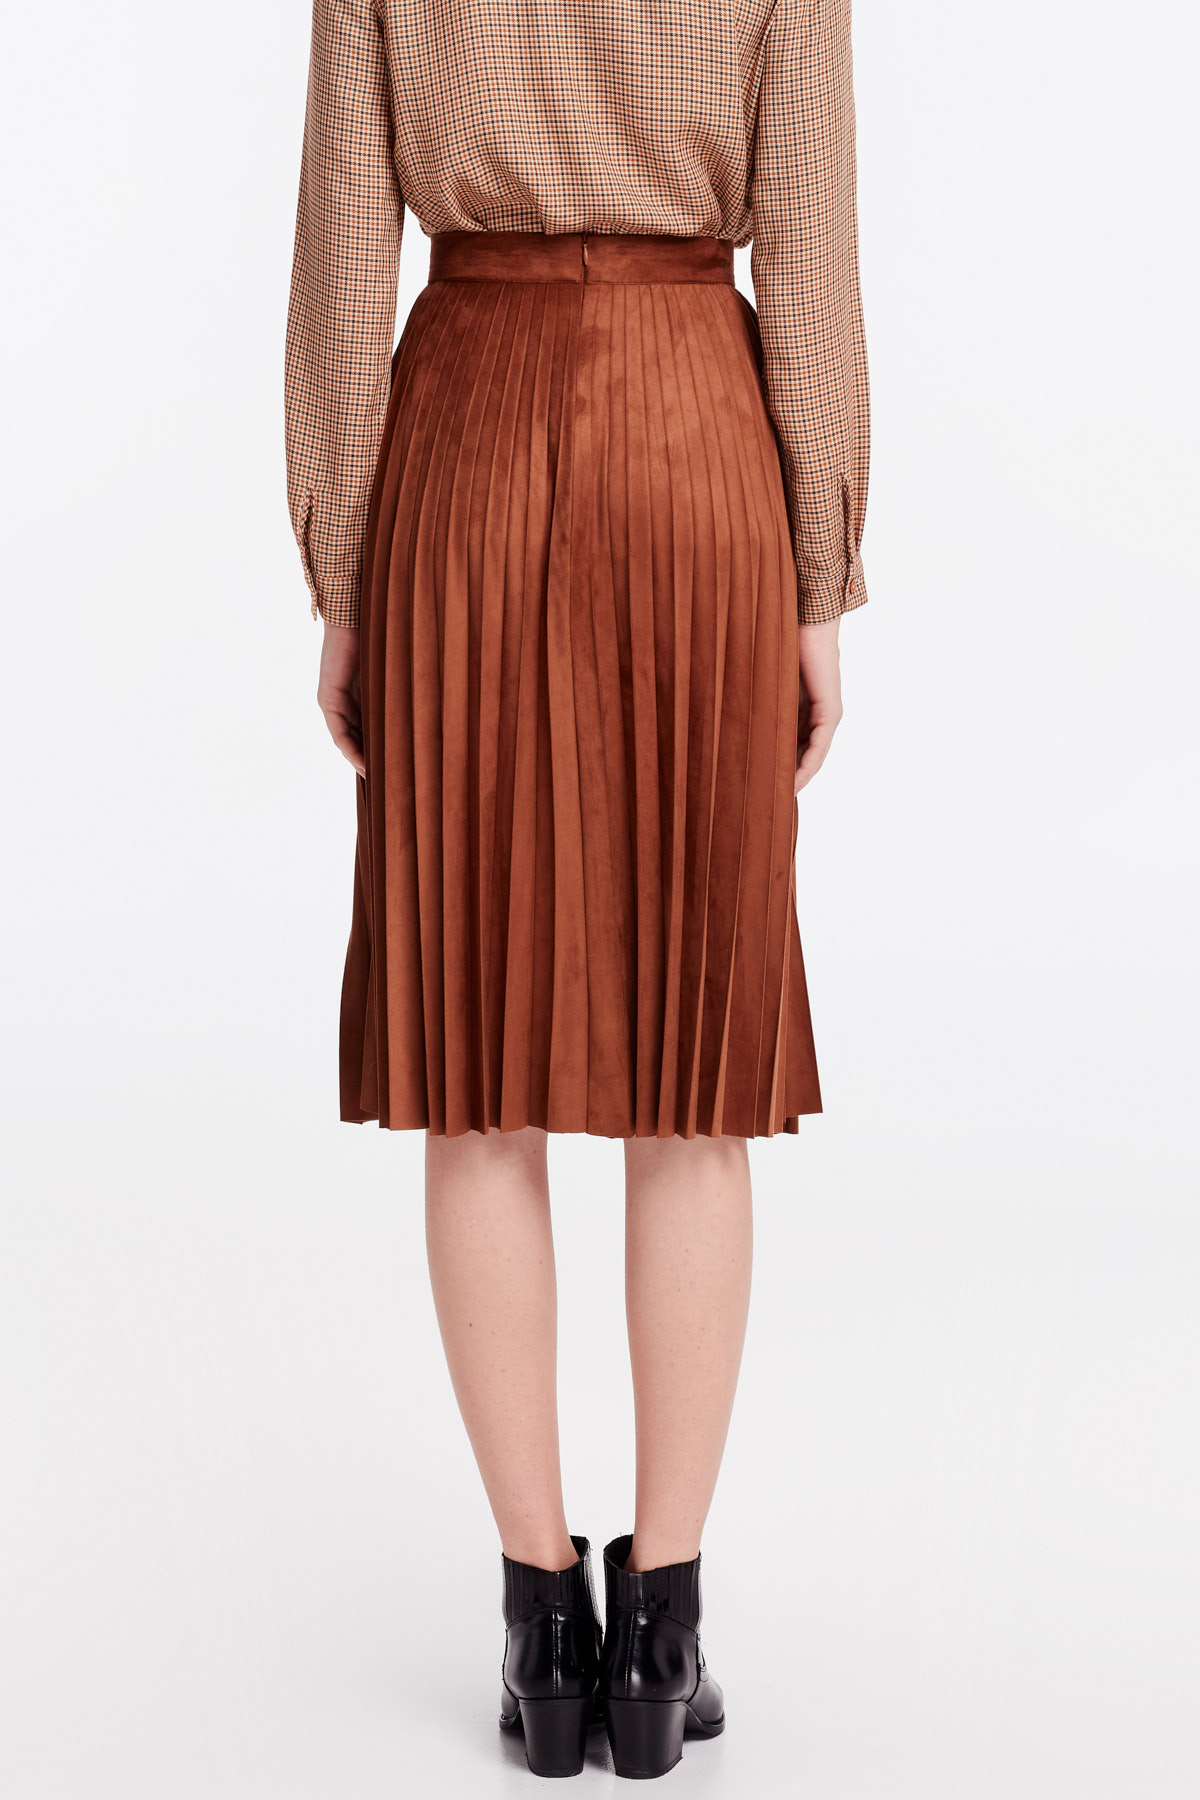 Brown suede pleated skirt, photo 7